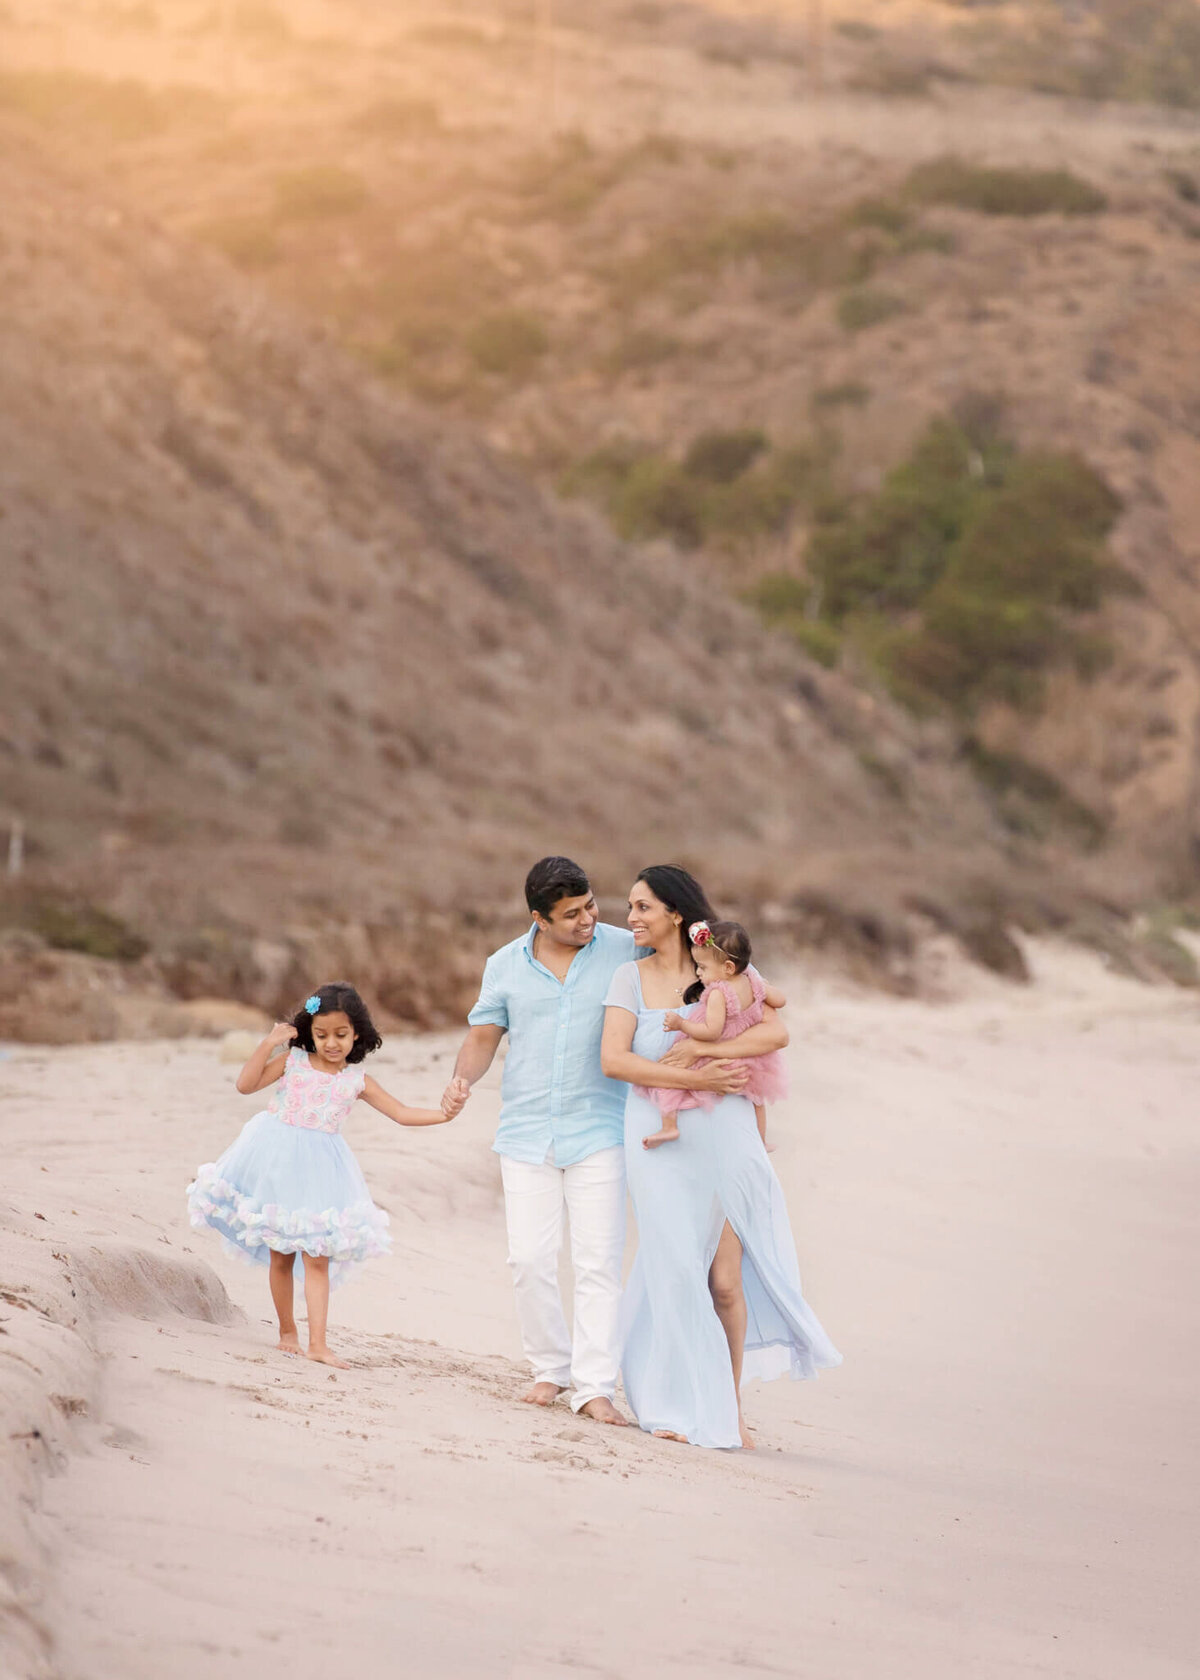 Family of 4 wearing pastel colors and walking along at the beach in Malibu